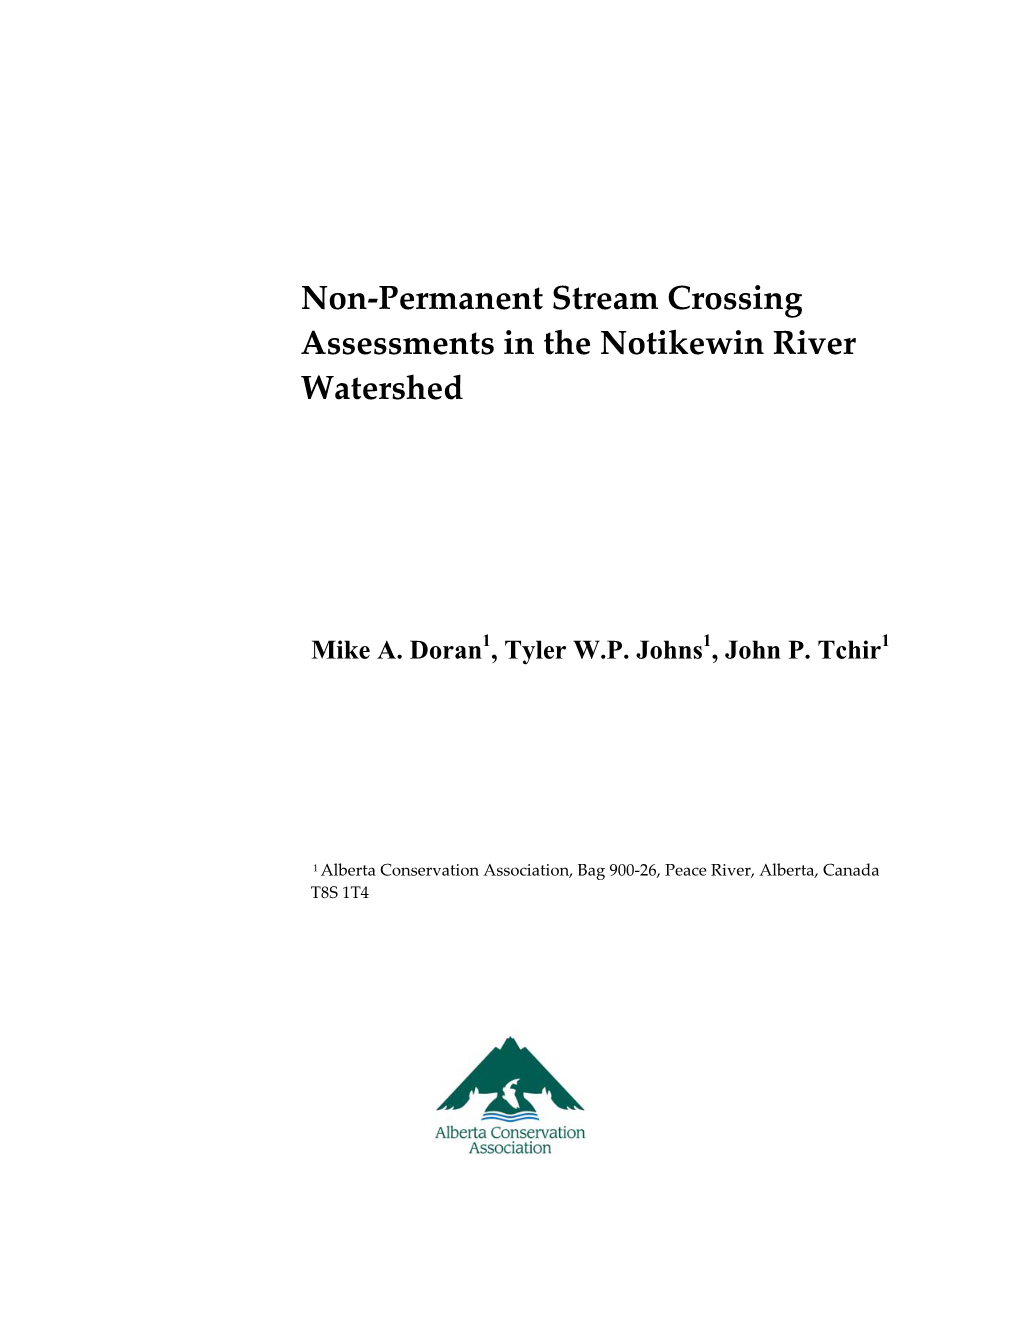 Non-Permanent Stream Crossing Assessment in the Notikewin River Watershed